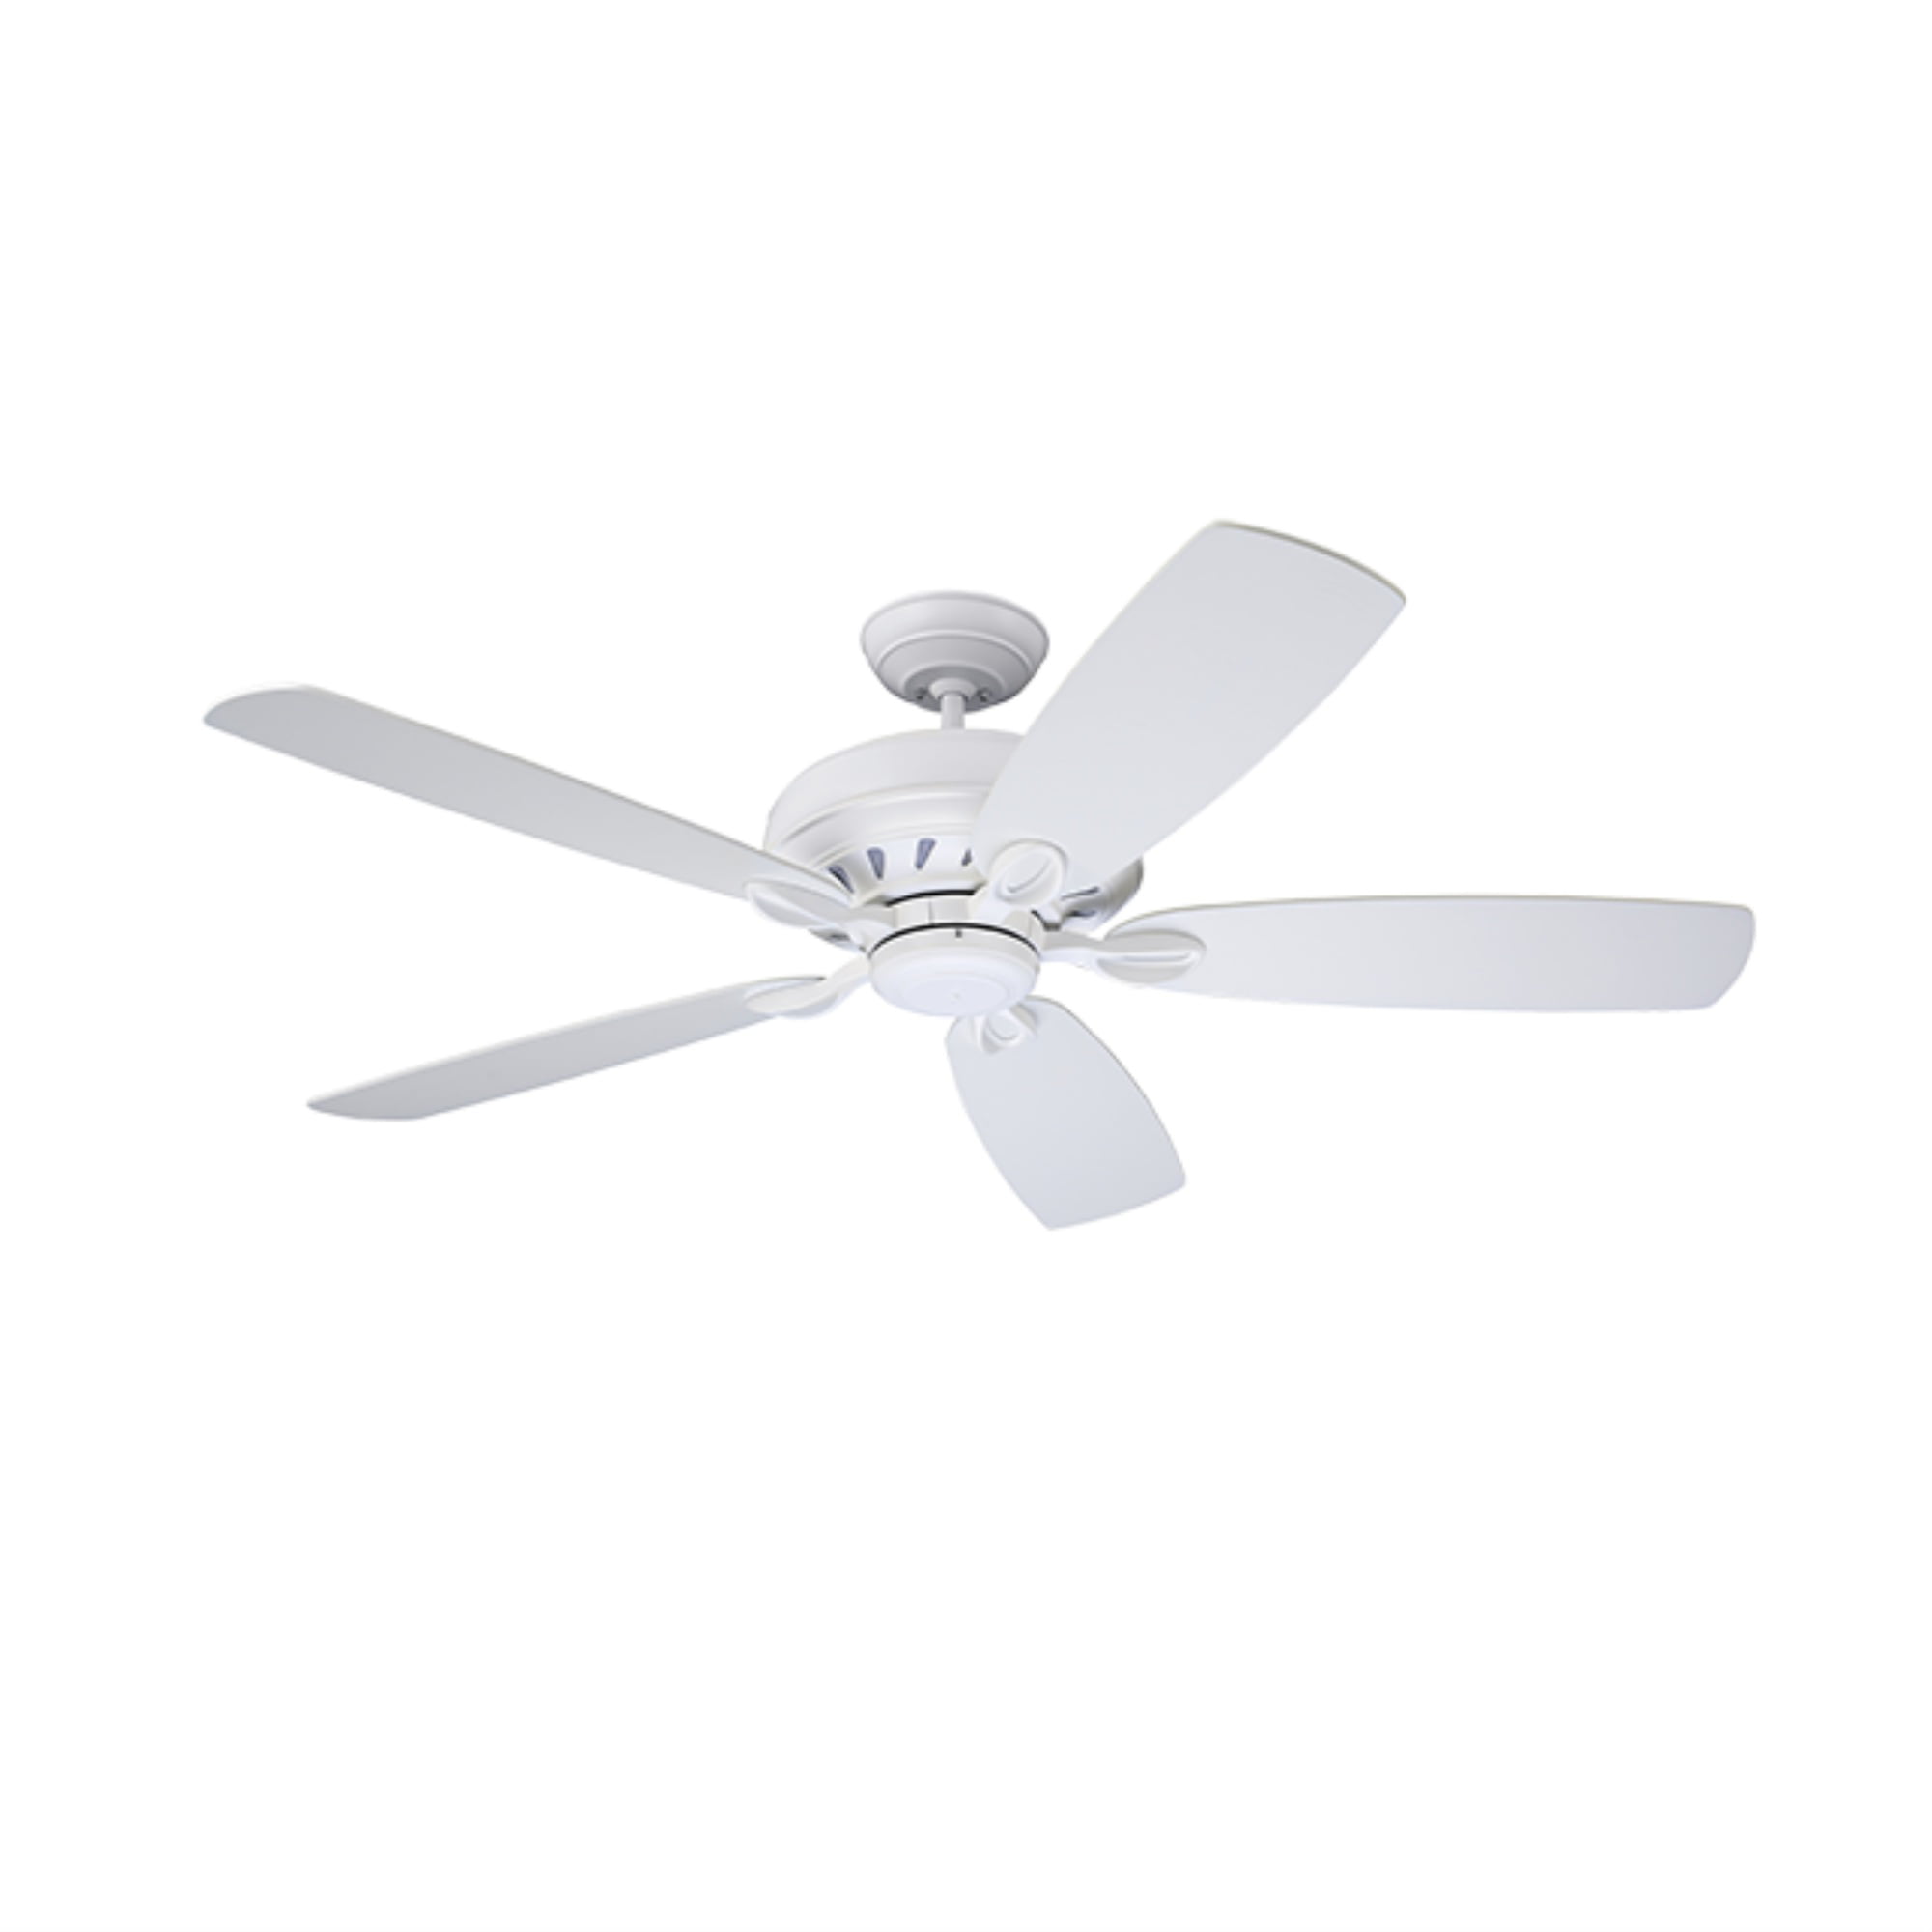 Emerson Ceiling Fan MOTOR ONLY No Accessories Penbrooke Select Eco Satin White 